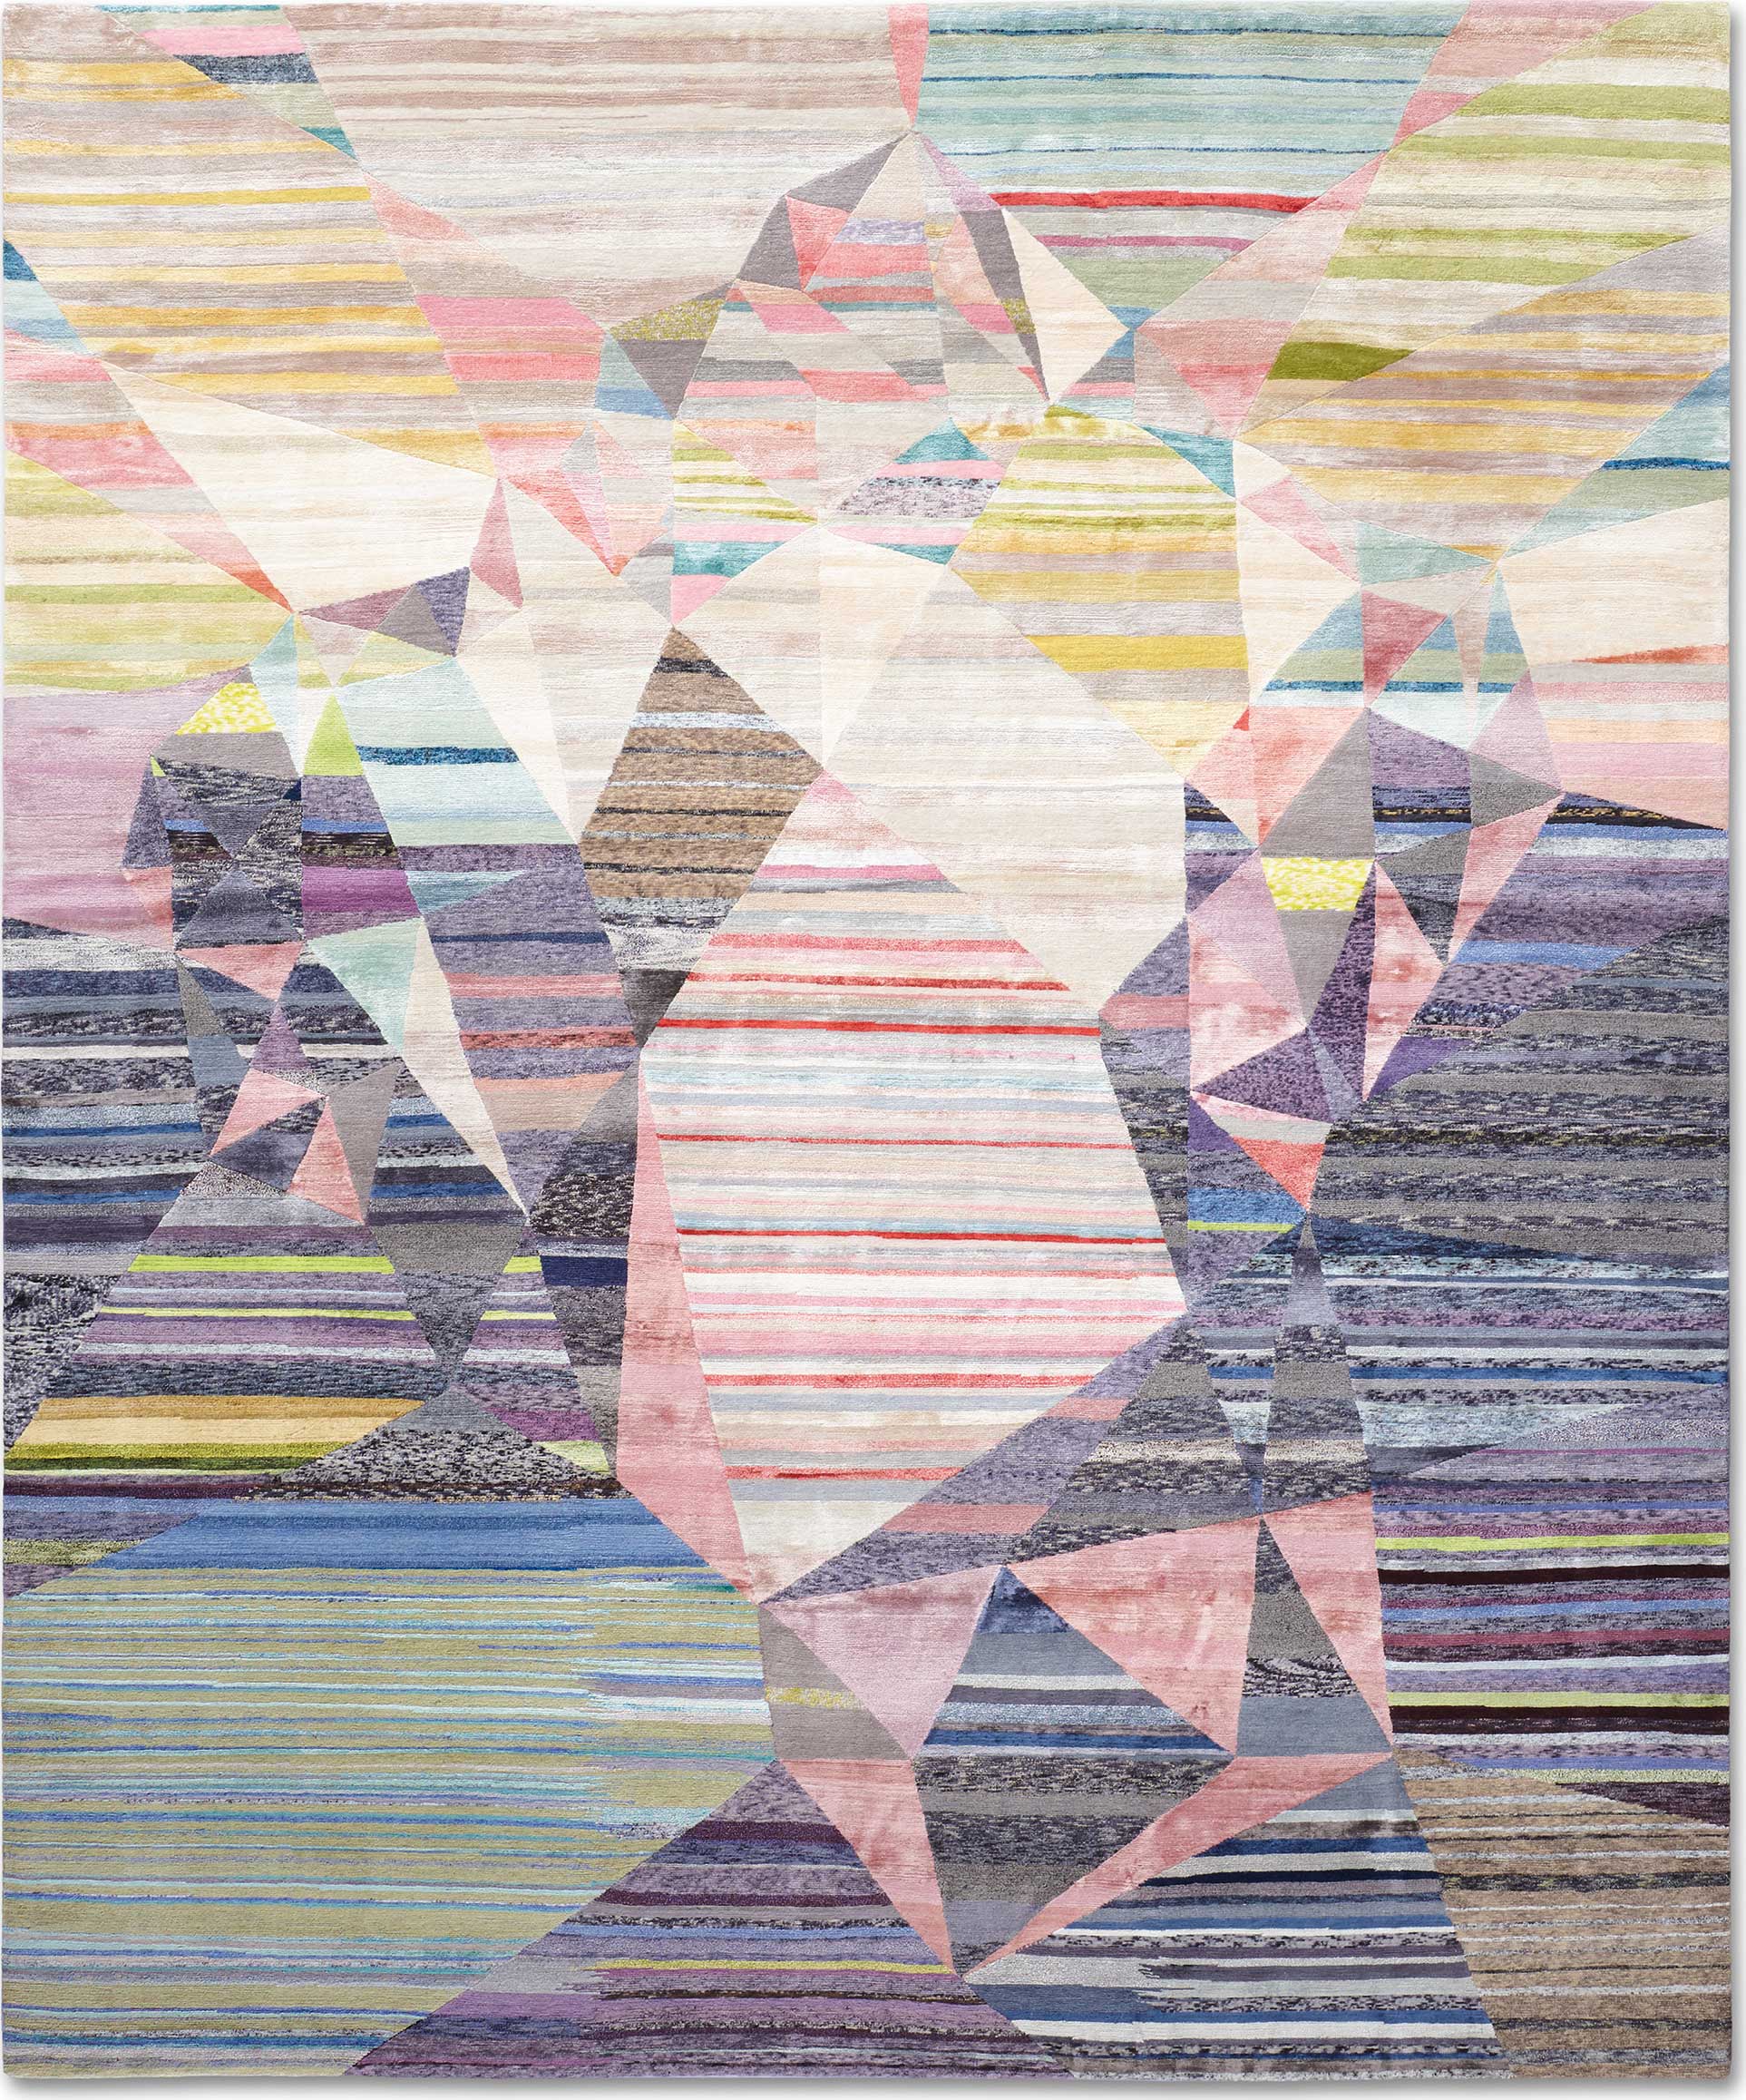 'Heart' by Rug Star by Jürgen Dahlmanns shown in their one-of-a-kind 'Eco' execution which utilizes surplus yarns from their ordinary production to create these extraordinarily unique versions of the firm's carpets. | Image courtesy of Rug Star by Jürgen Dahlmanns.